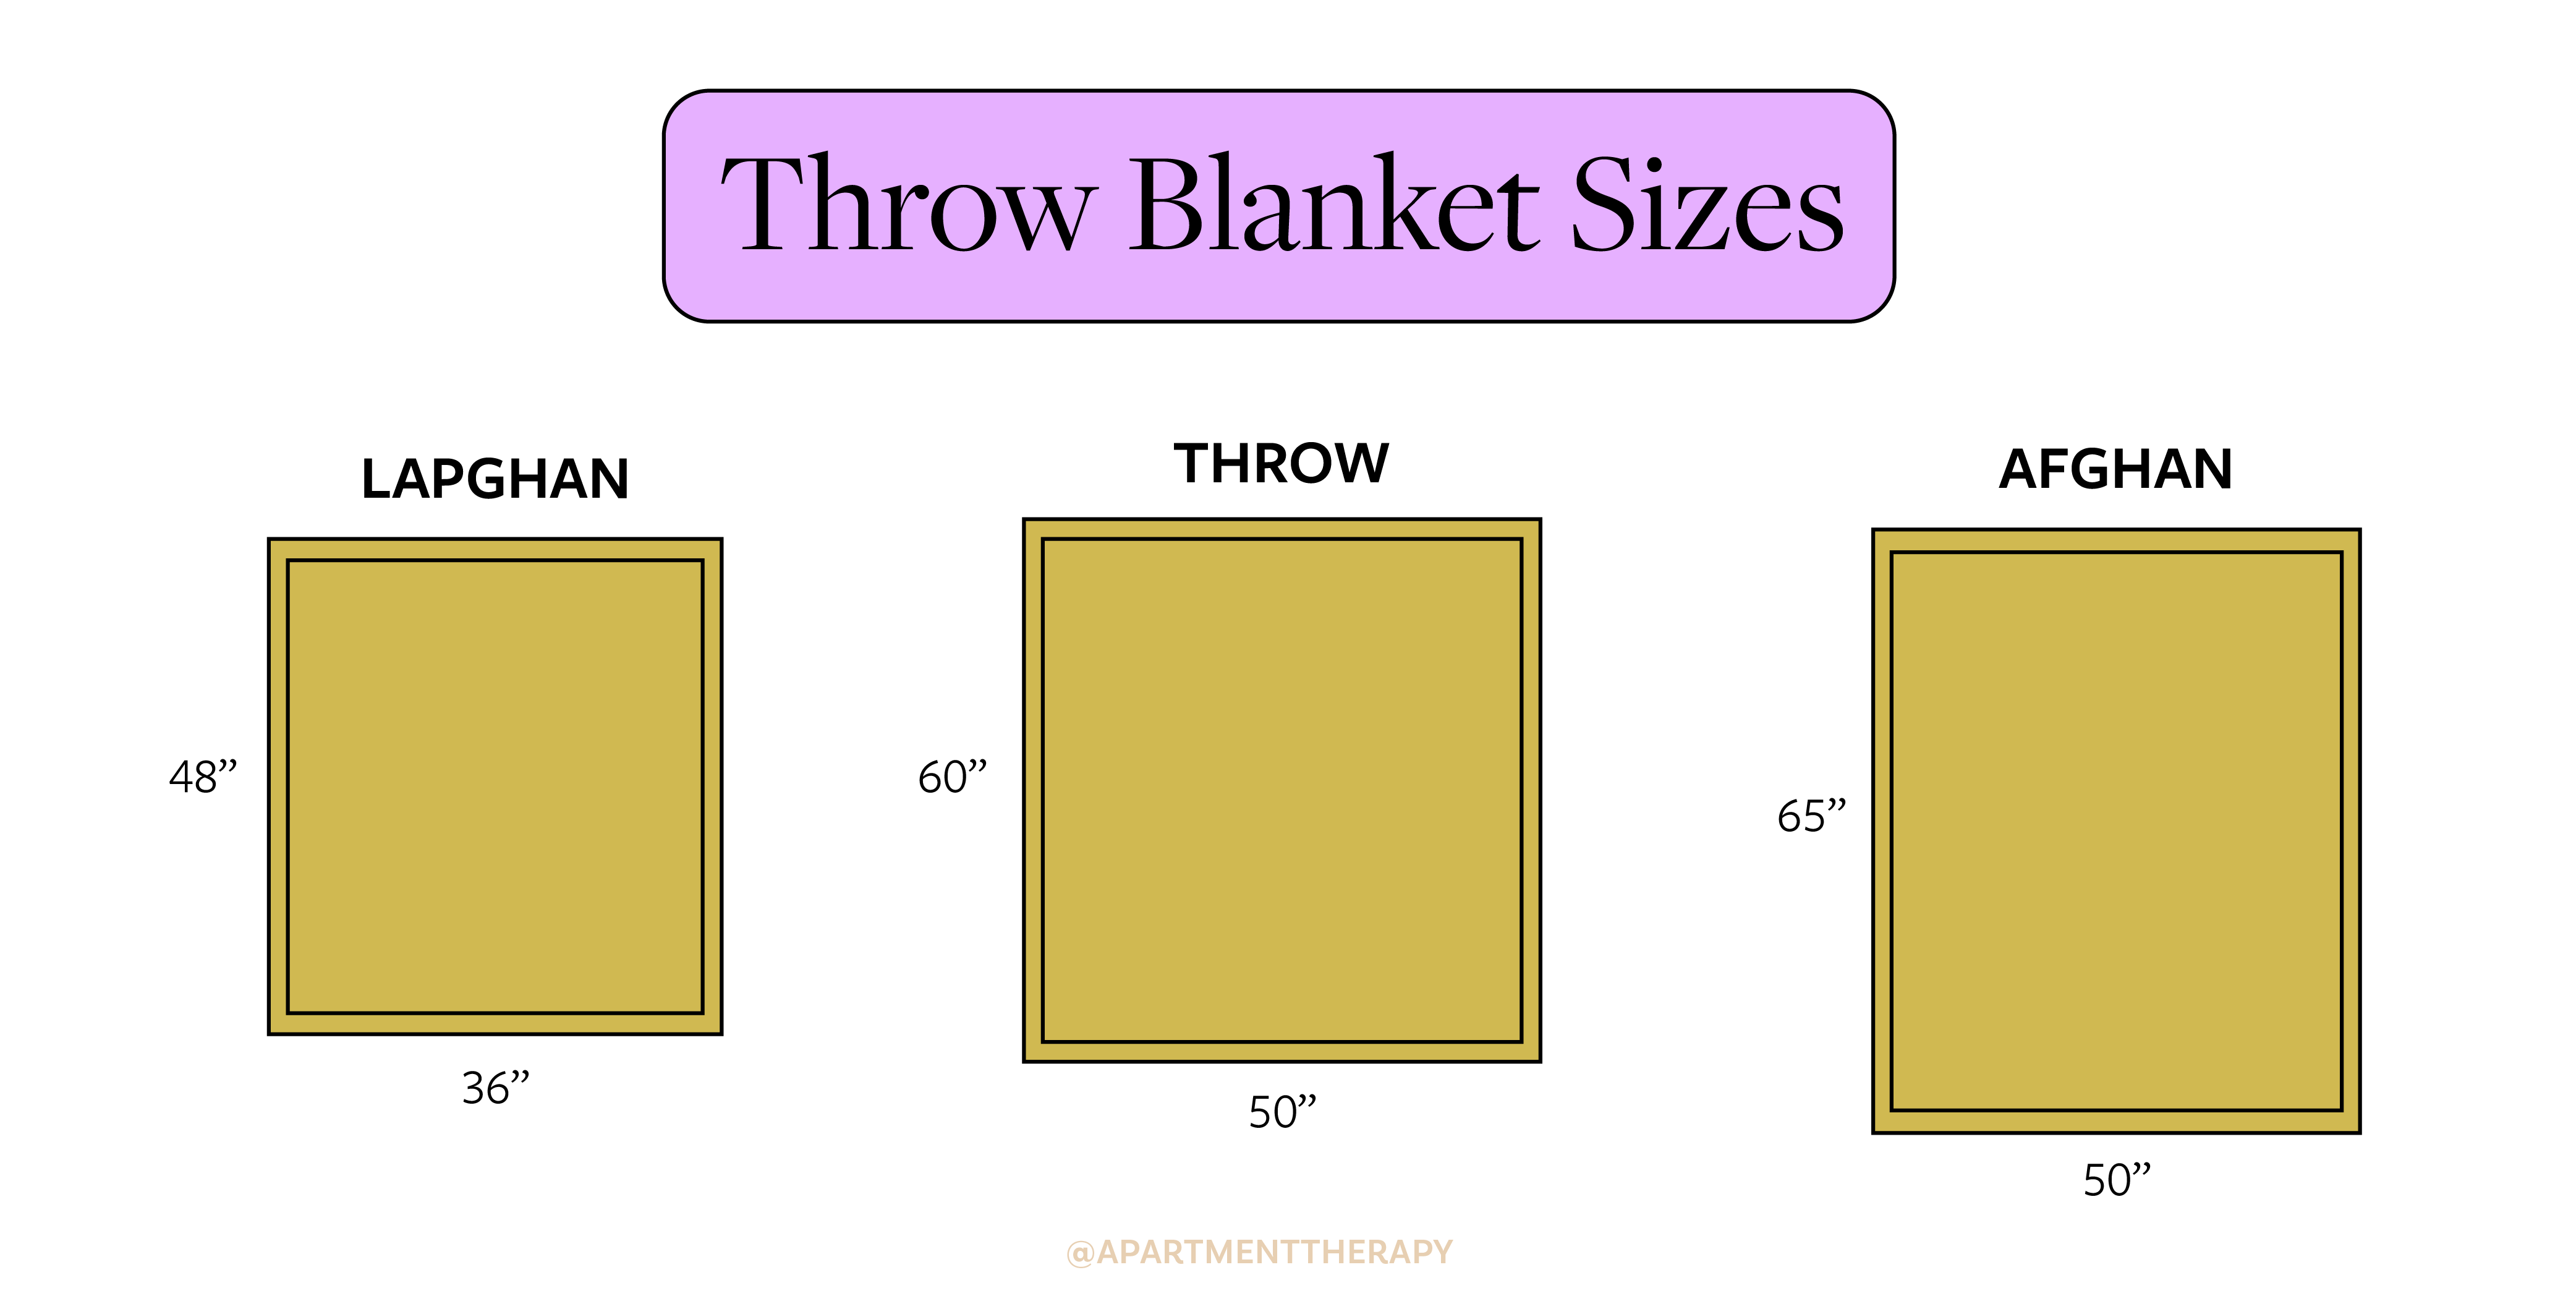 Standard Blanket Sizes - A Crocheted Simplicity